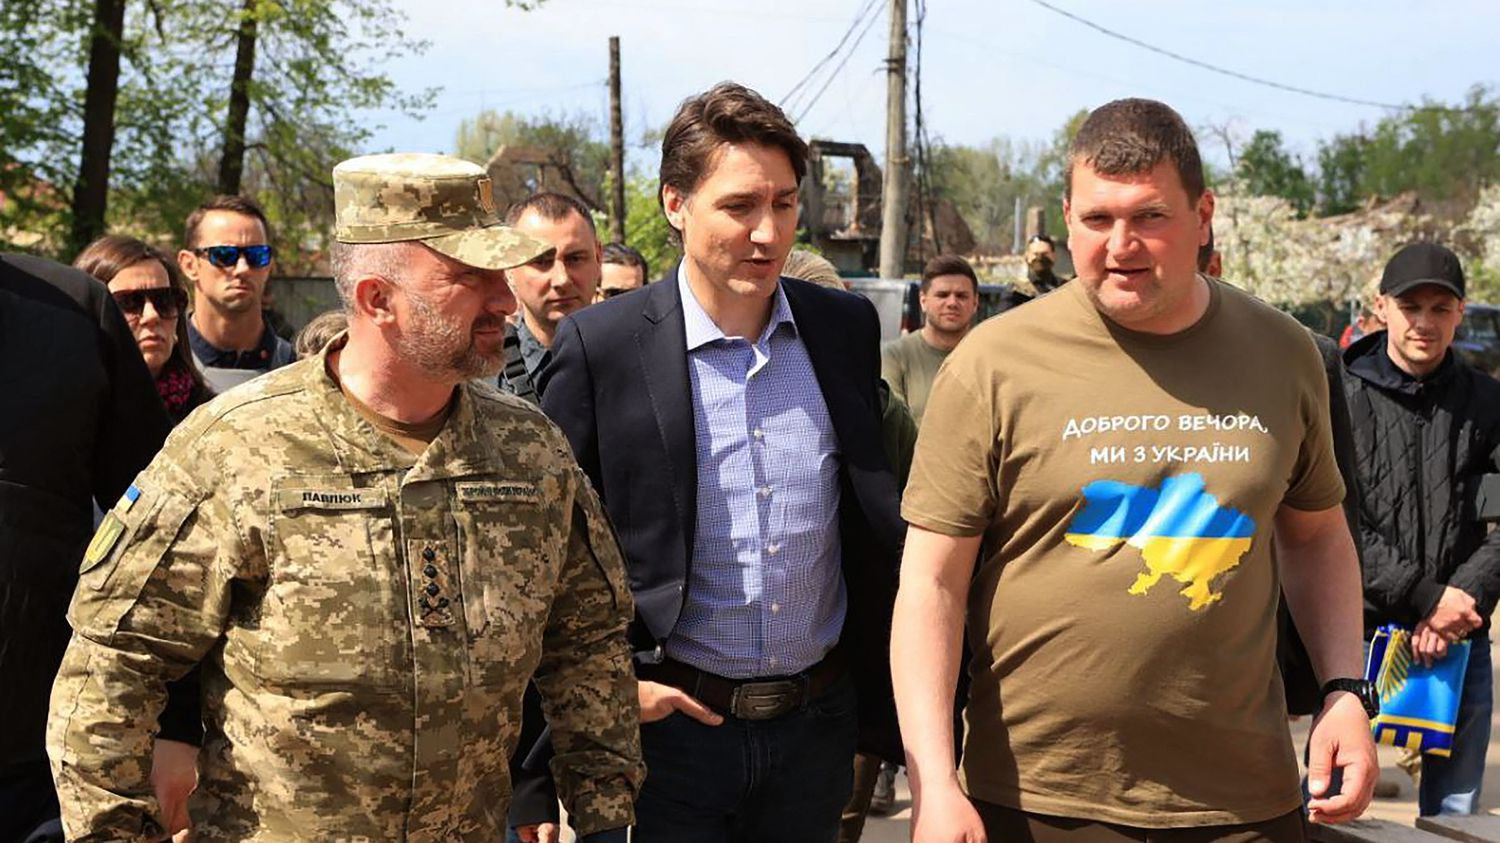 War in Ukraine: Canadian Prime Minister Justin Trudeau visited Irpin, near kyiv
